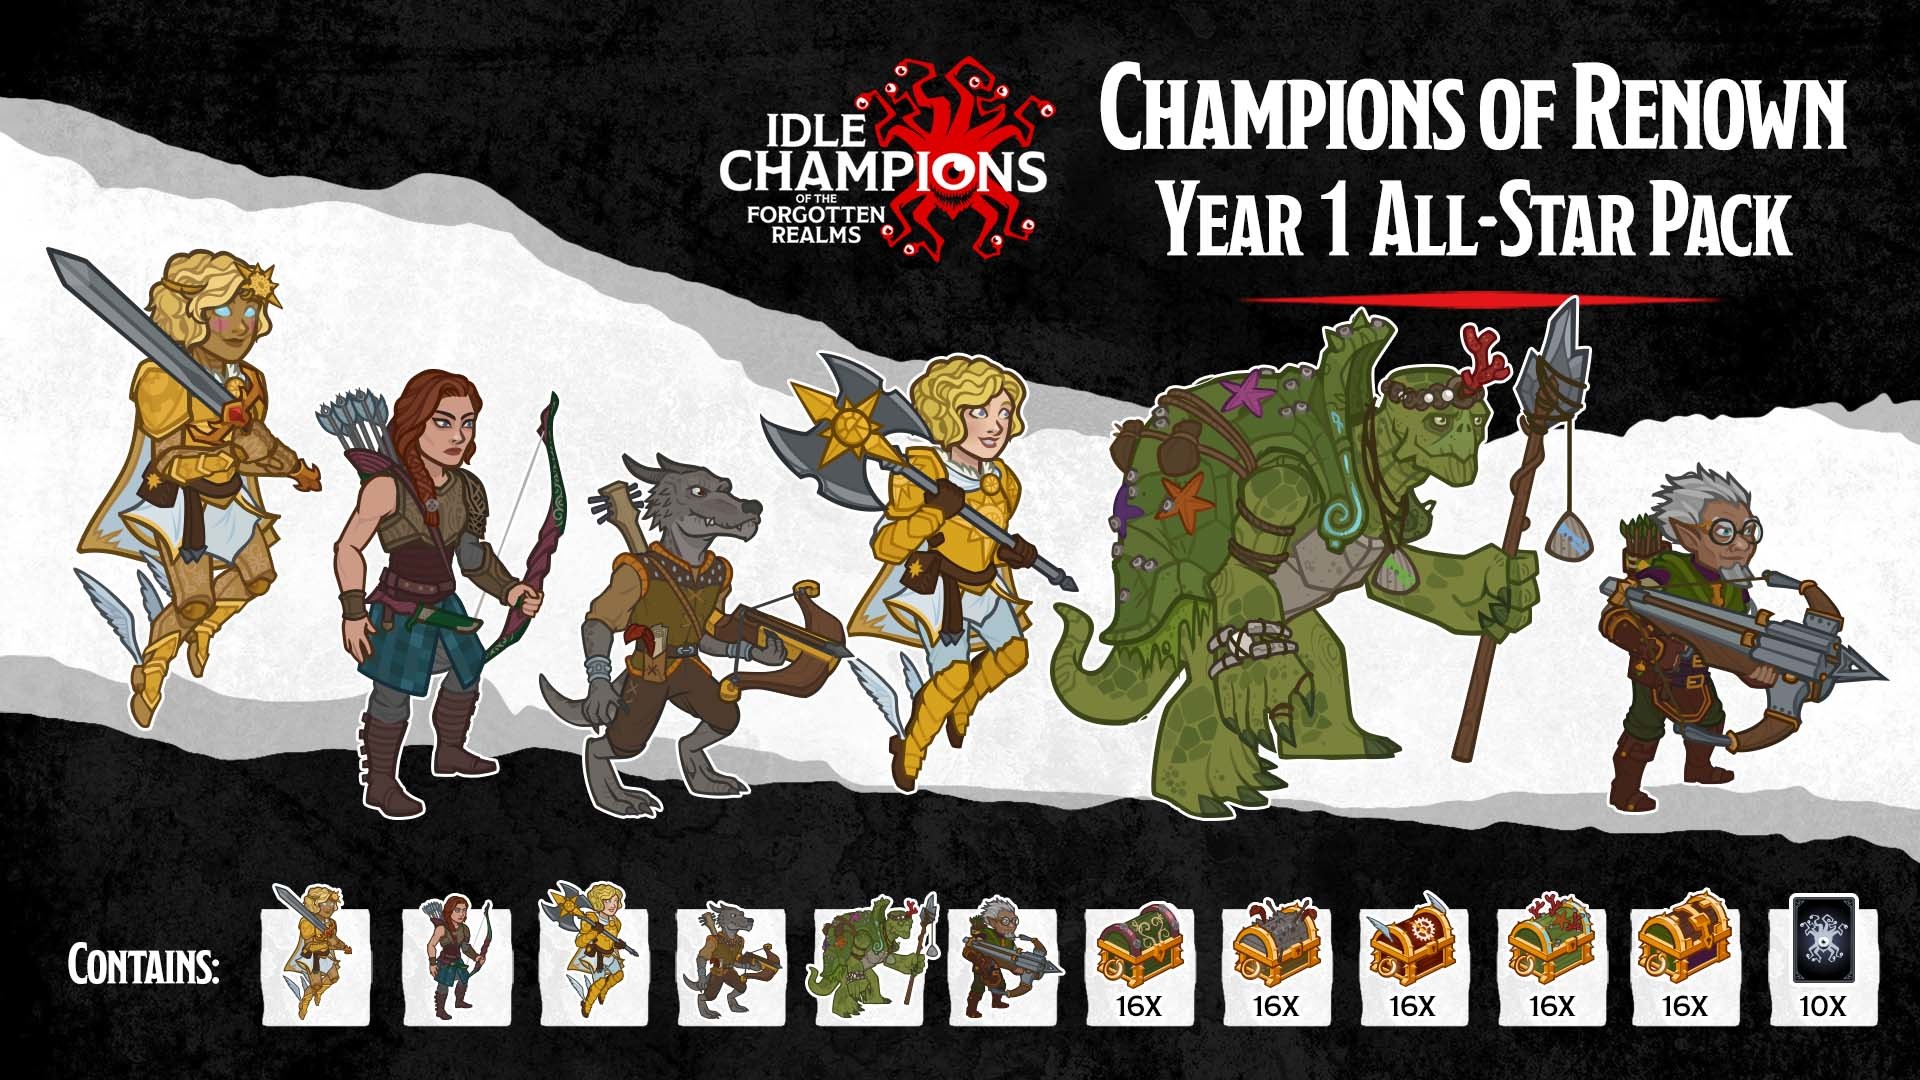 Idle Champions of the Forgotten Realms on Steam